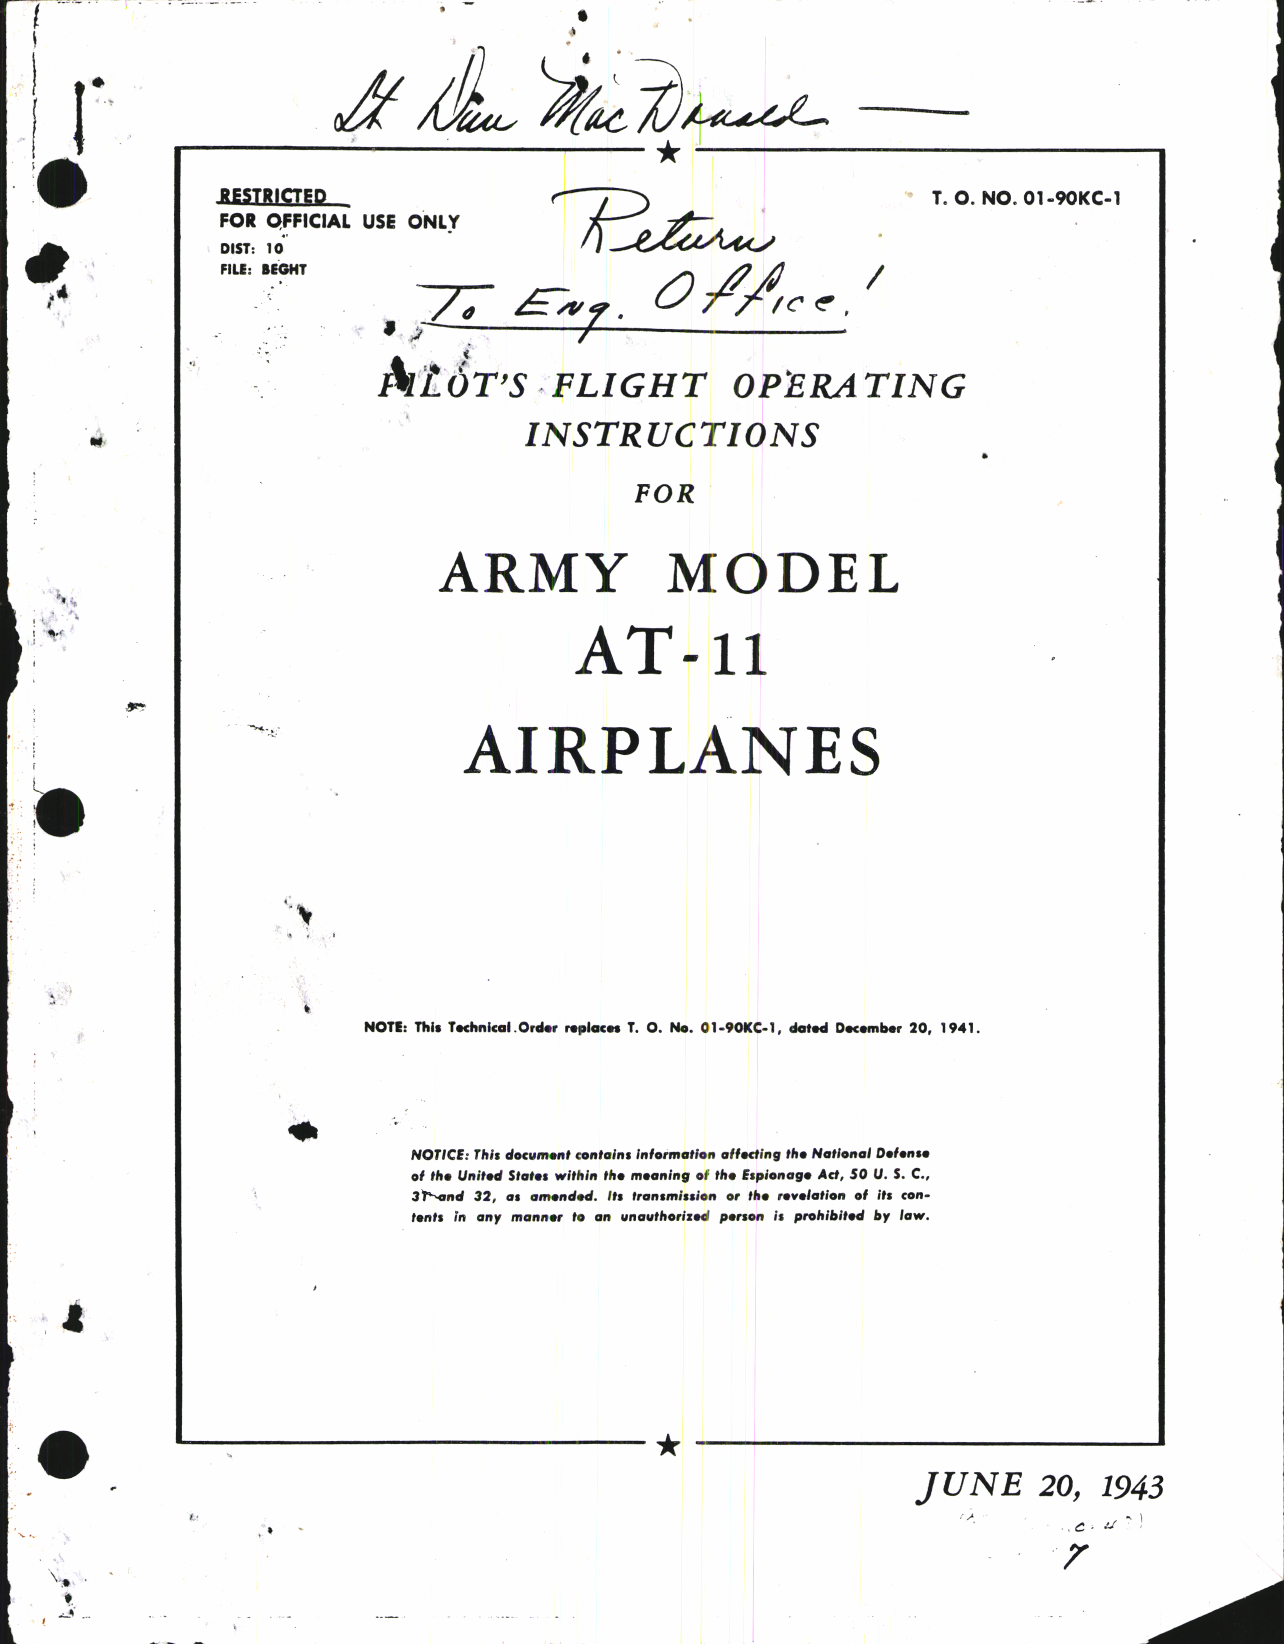 Sample page 1 from AirCorps Library document: Pilot's Flight Operating Instructions for Army Model AT-11 Airplanes